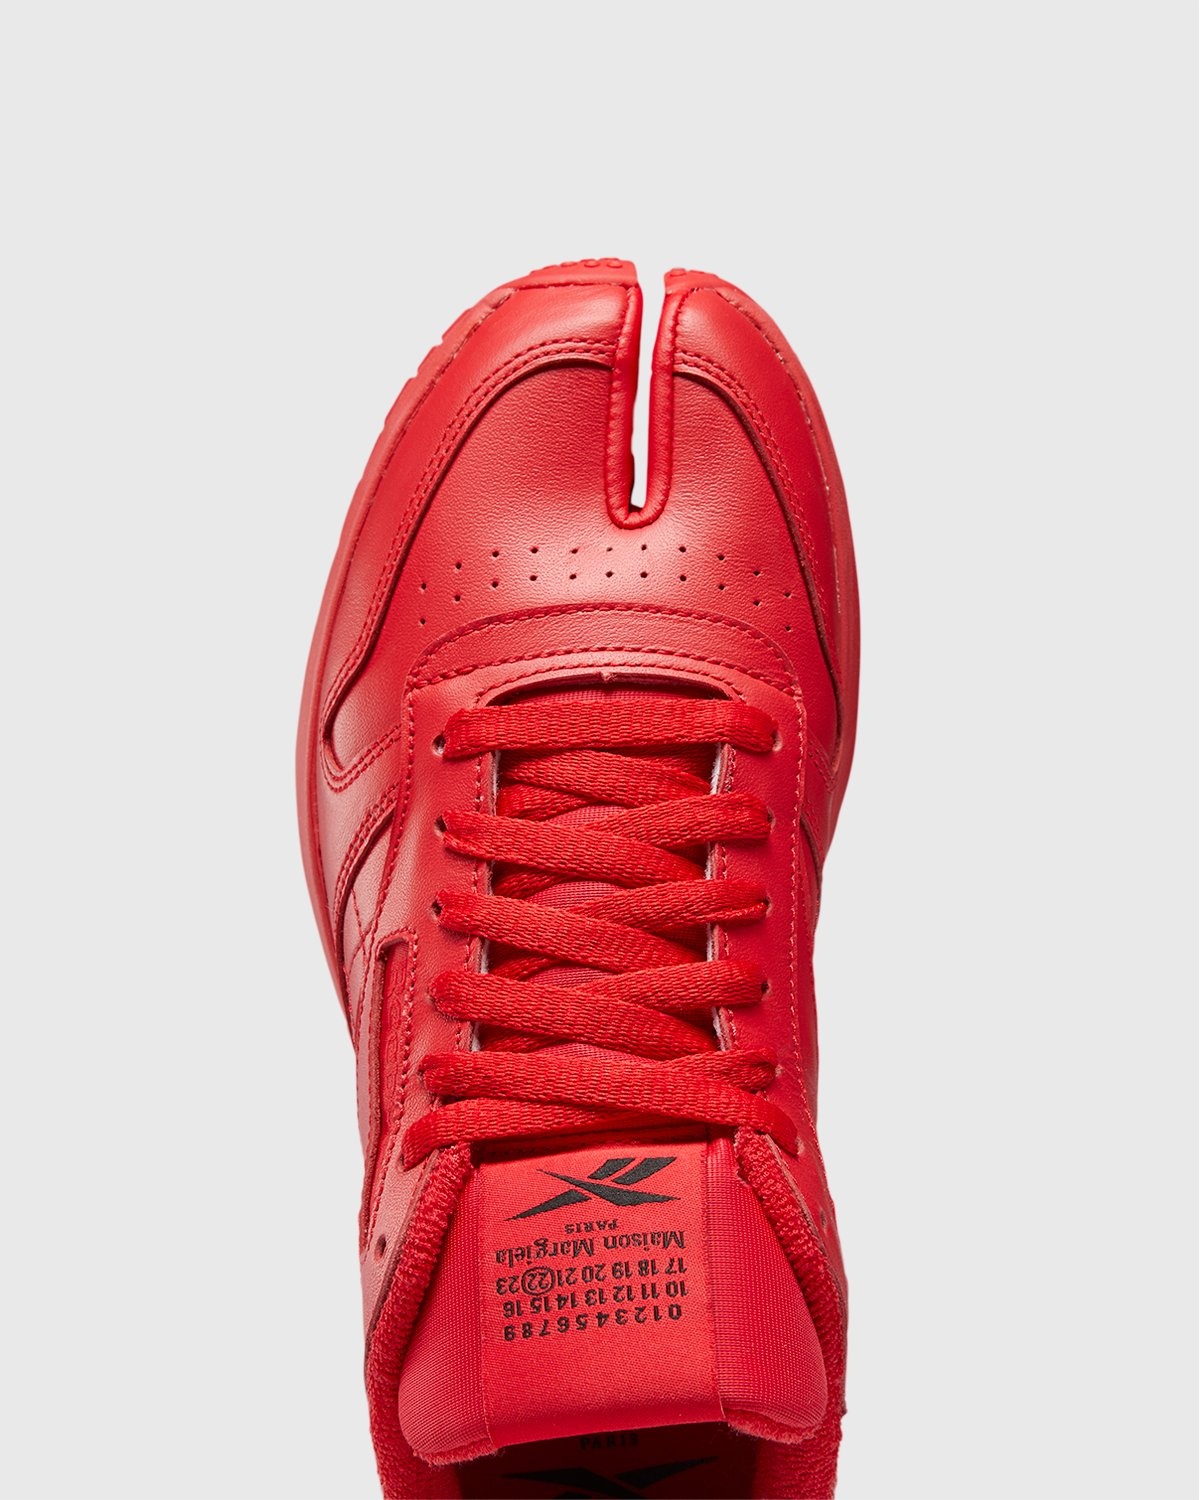 Maison Margiela x Reebok – Classic Leather Tabi Red - Sneakers - Red - Image 6